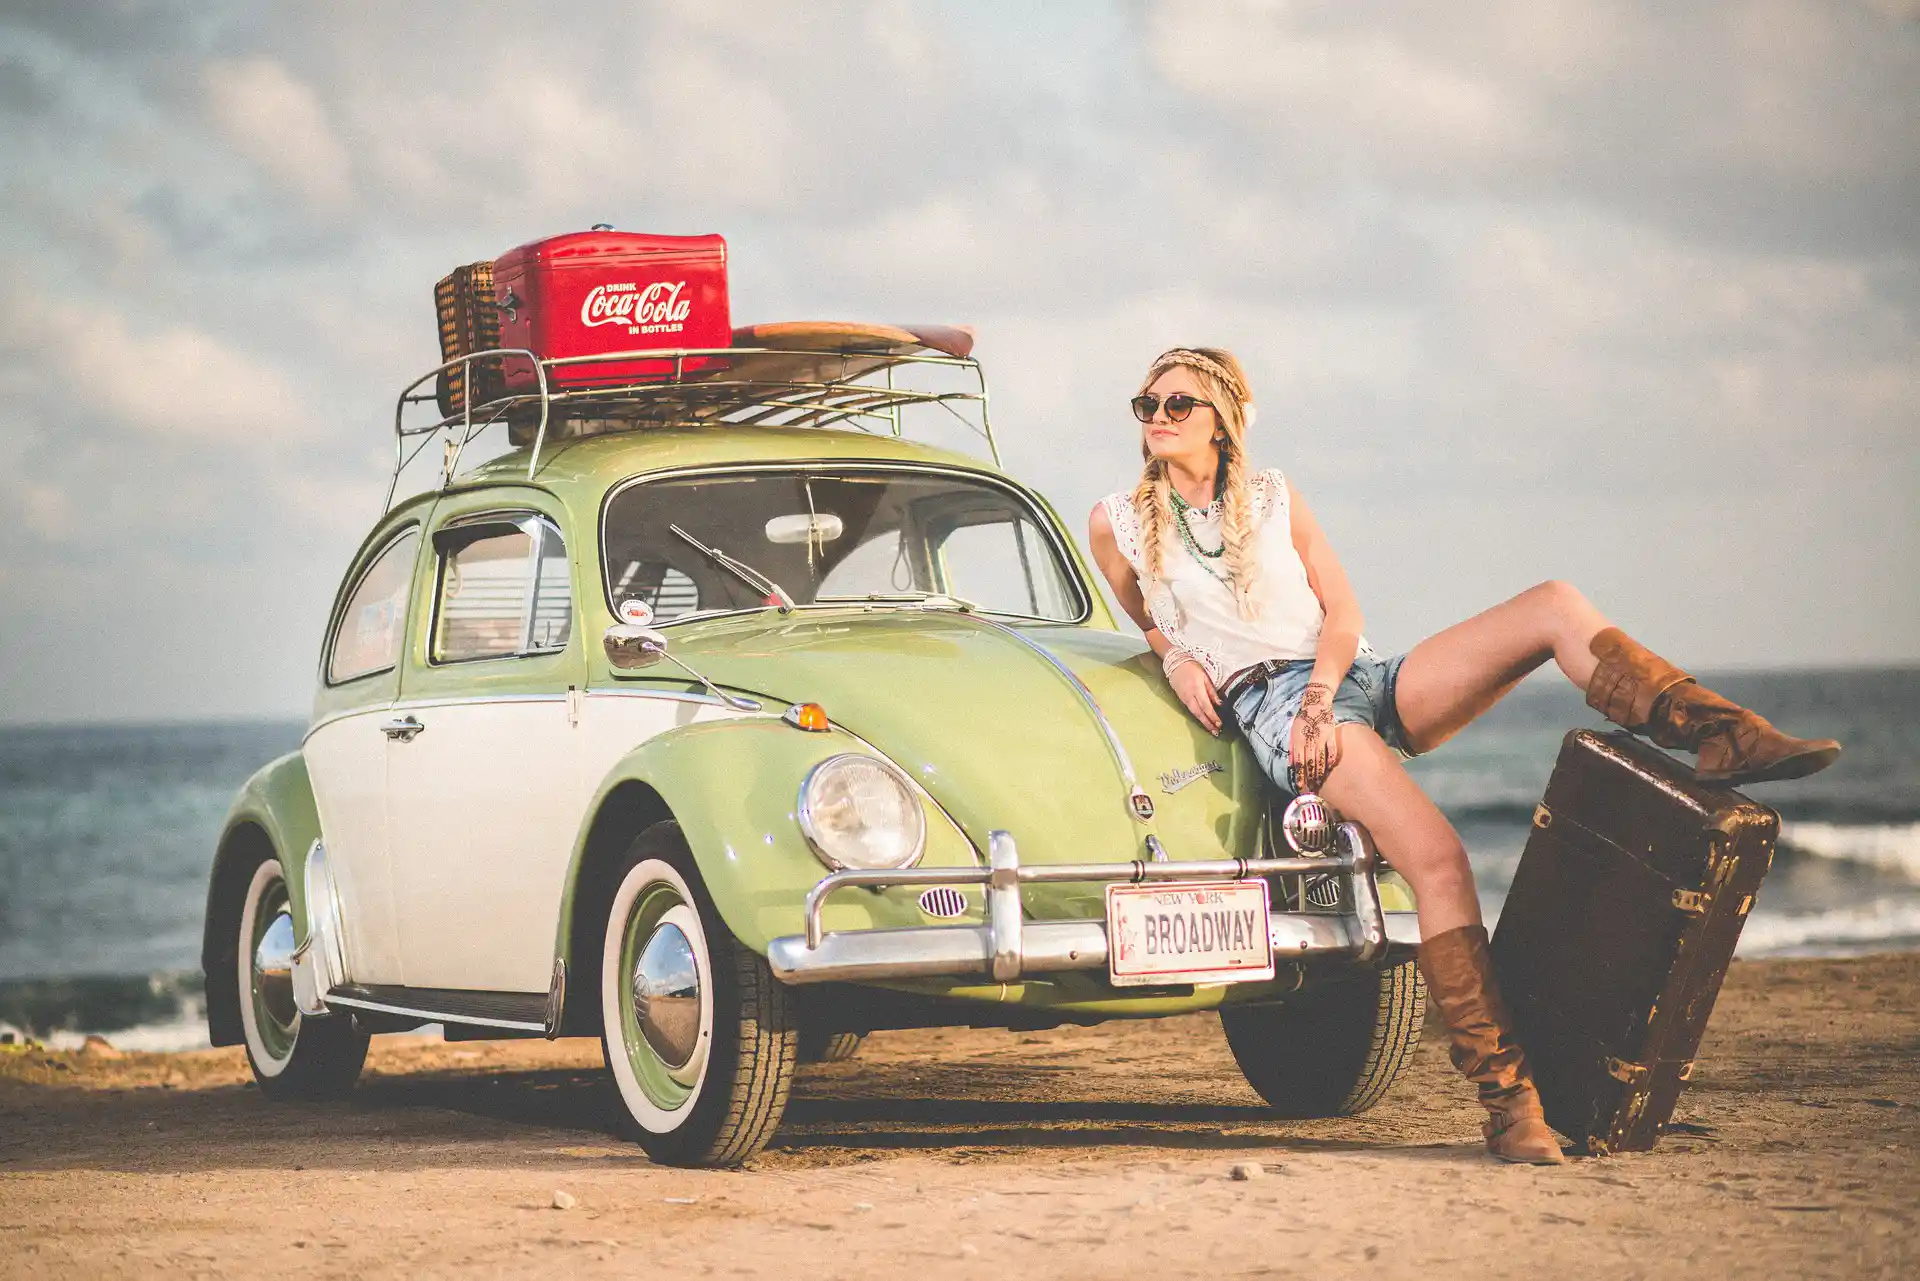 In the picture, a blonde woman with braids leaning on a green car parked on the seaside. She has a leg on a luggage, while some other luggages are piled on the roof of the car.